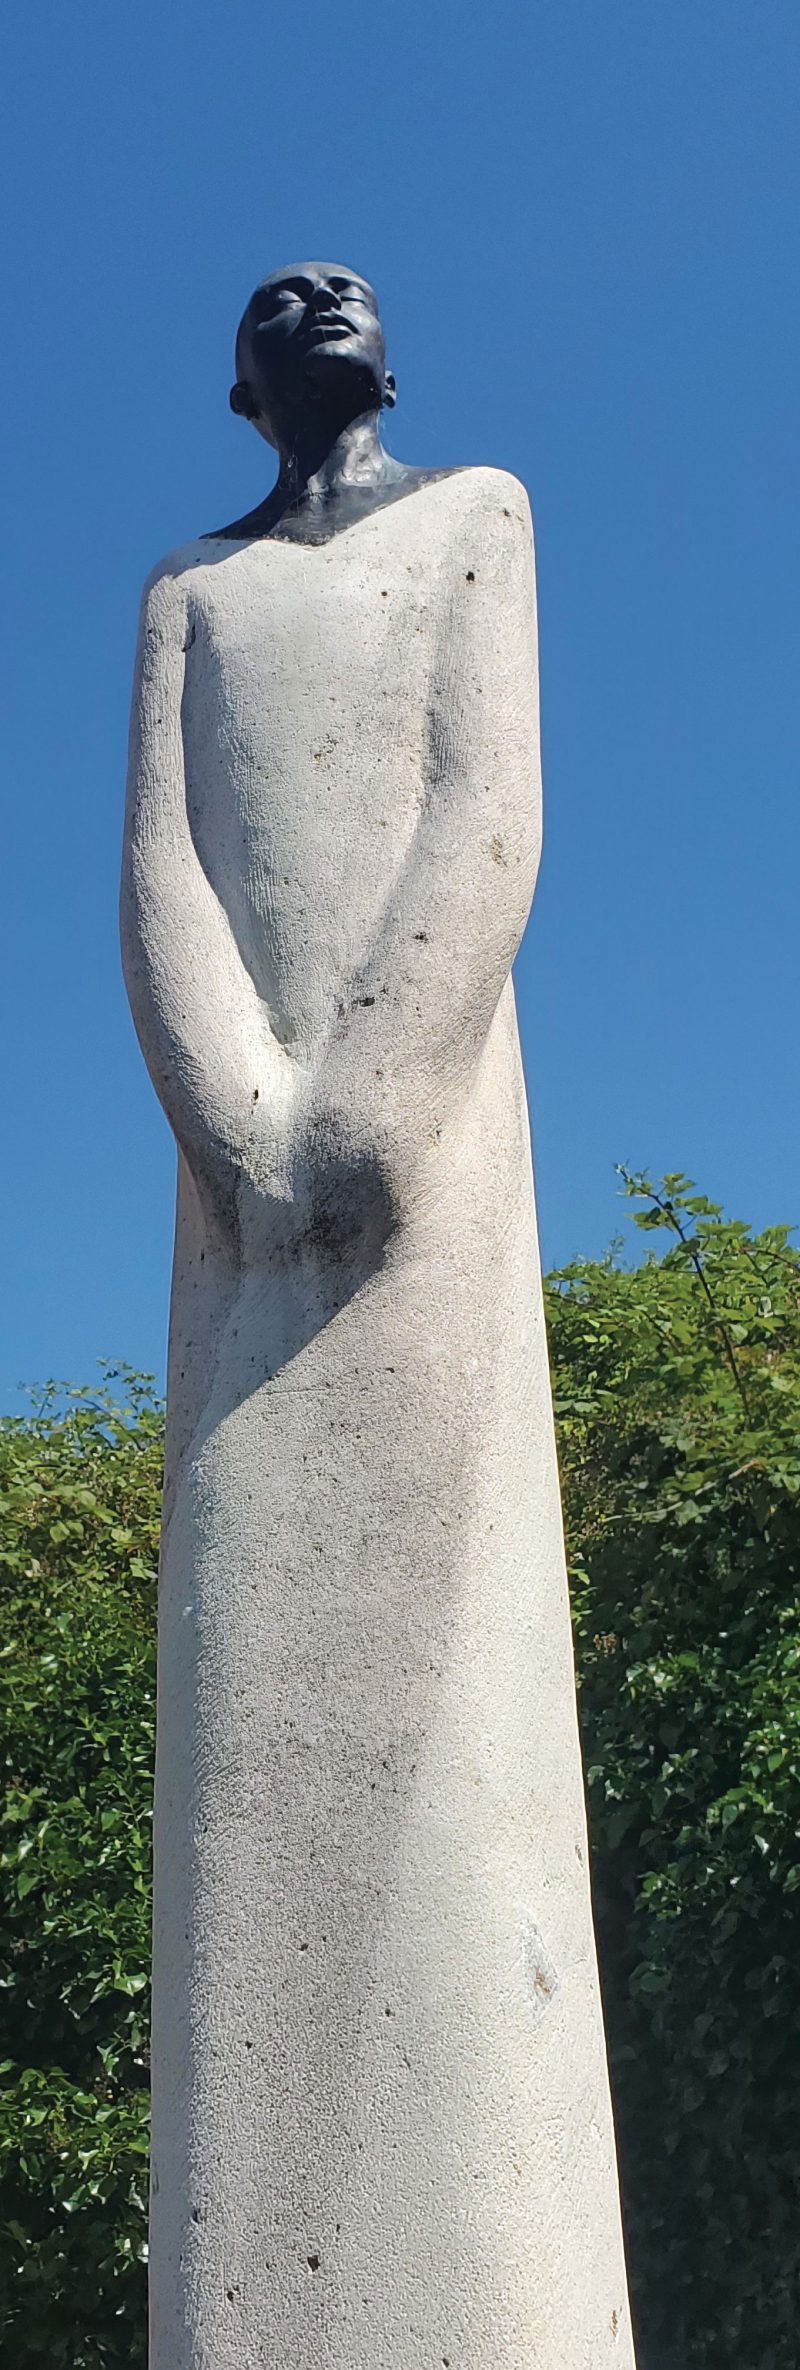 Tall stone statue of a woman